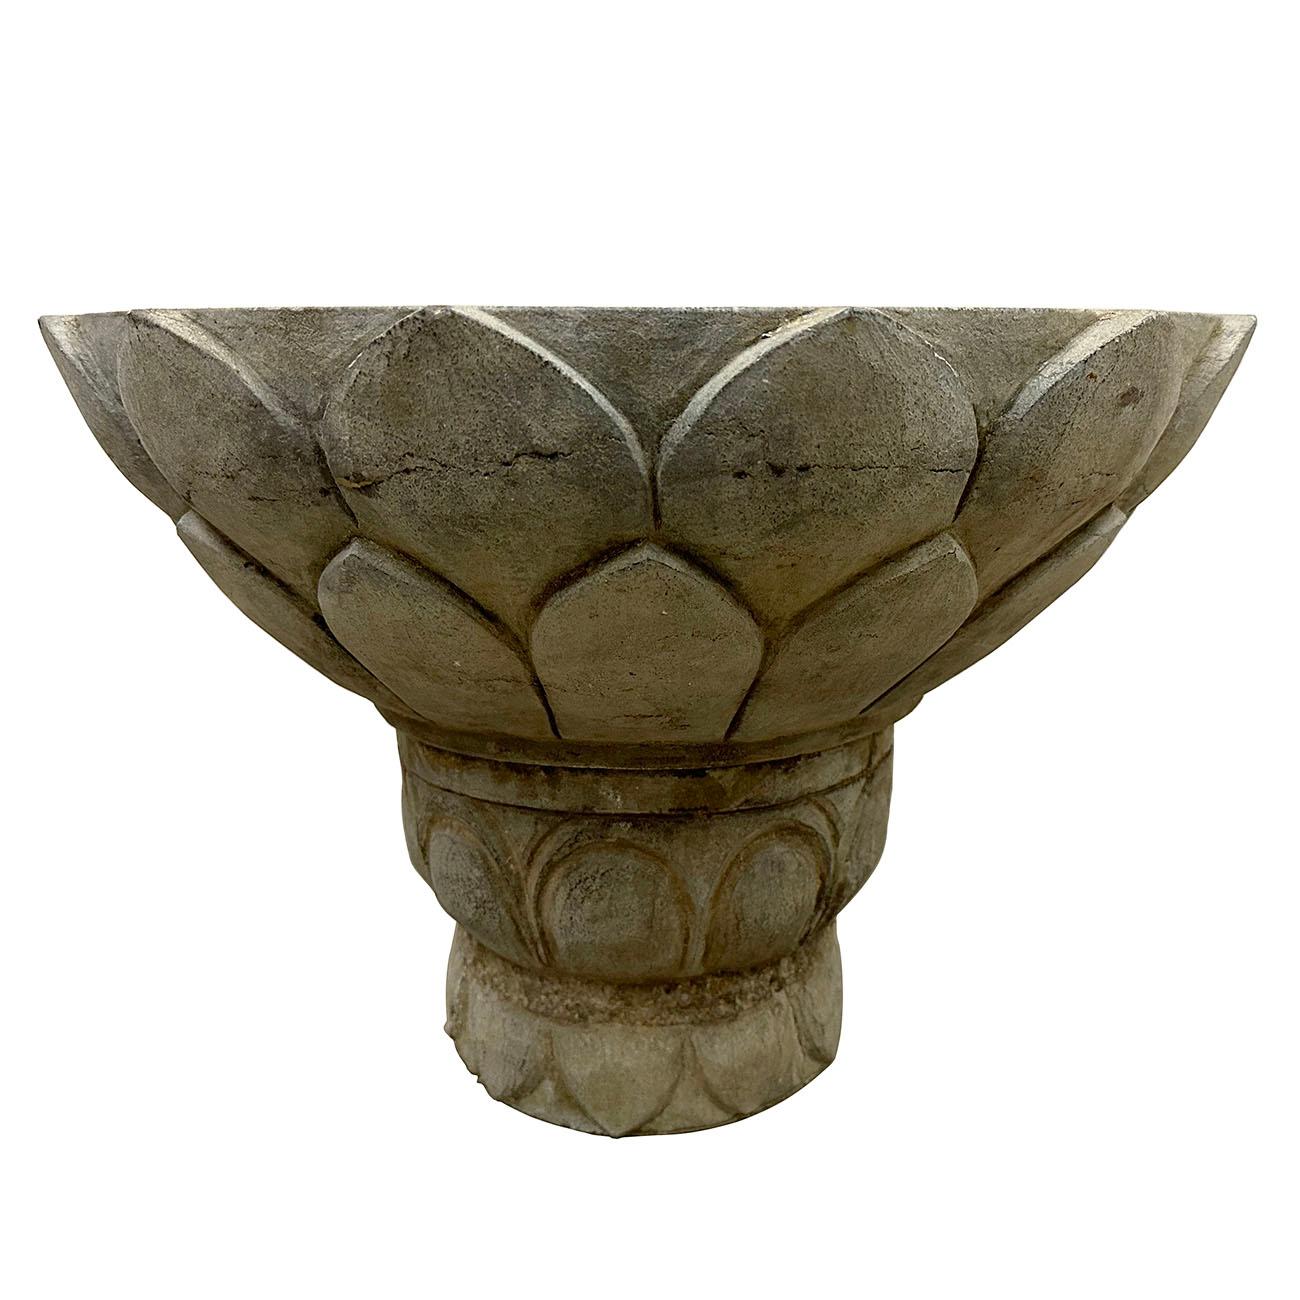 This stone planter is retrieved from the village in northern part of China. It is hand chiseled out of solid stone and hand carved by the local stone master. It come with 2 pieces and set them together for planter. It has lotus flower carvings on